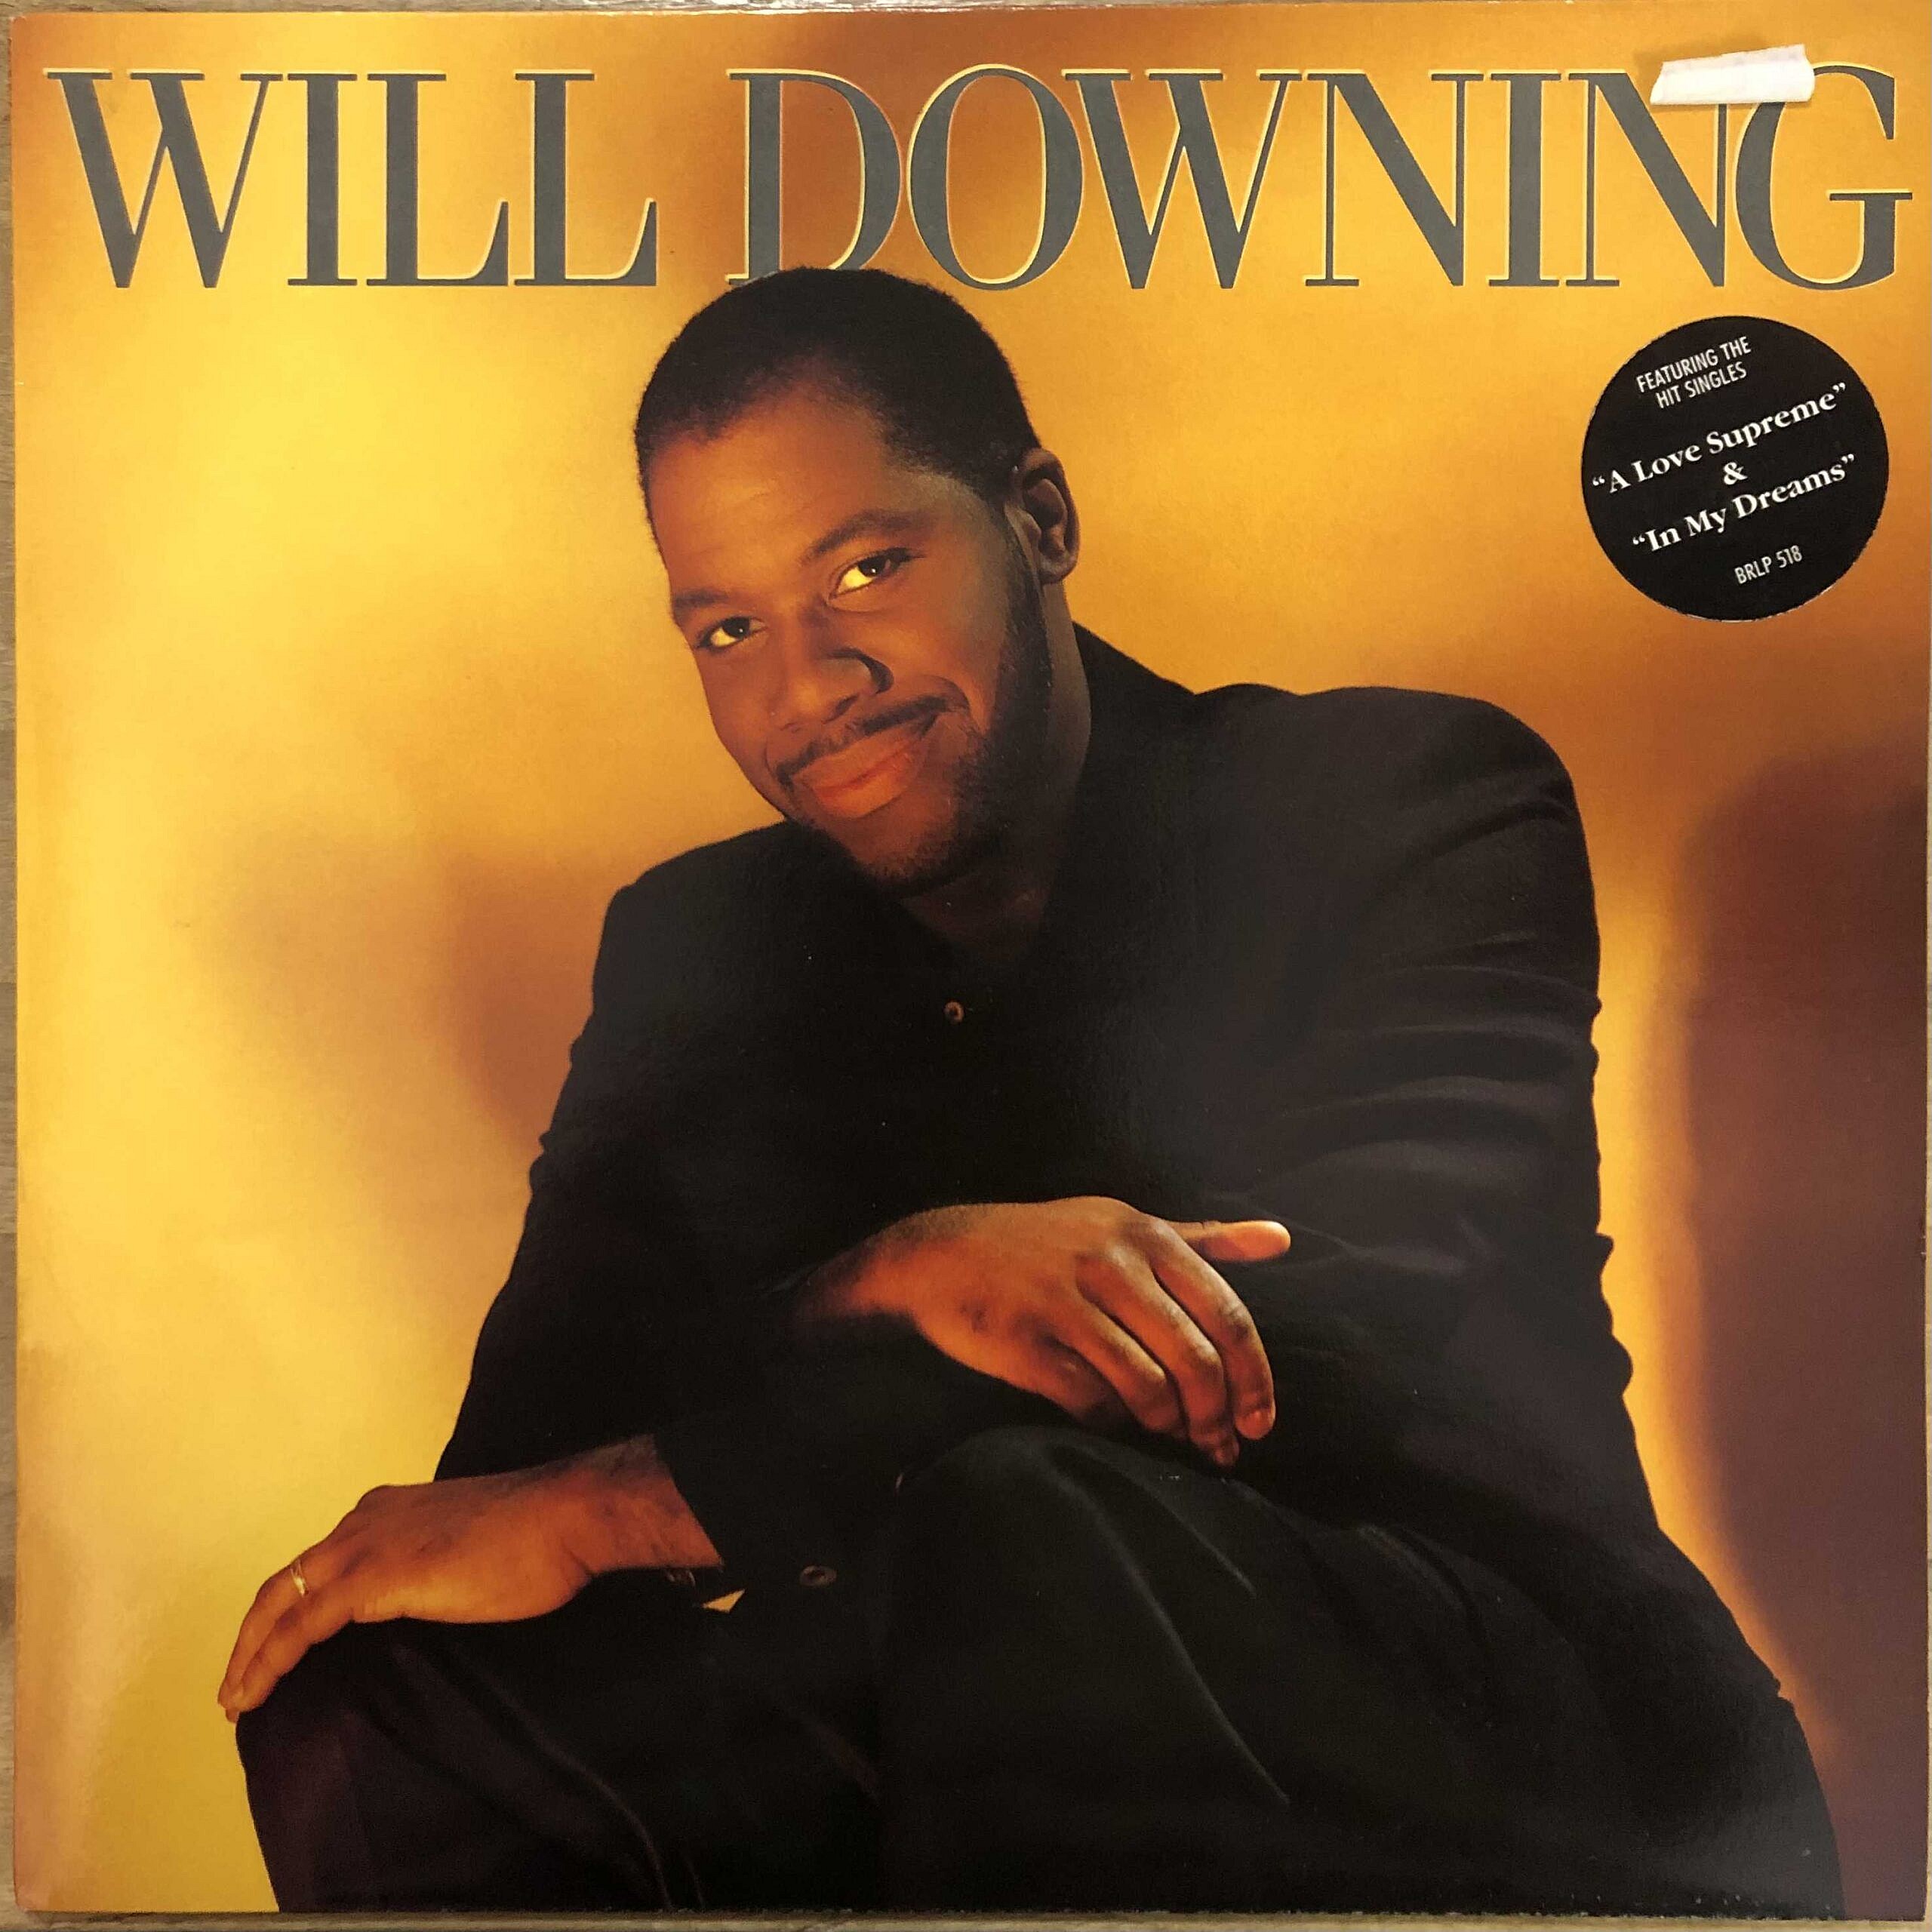 Will Downing All Albums & Singles Soul Brother Records